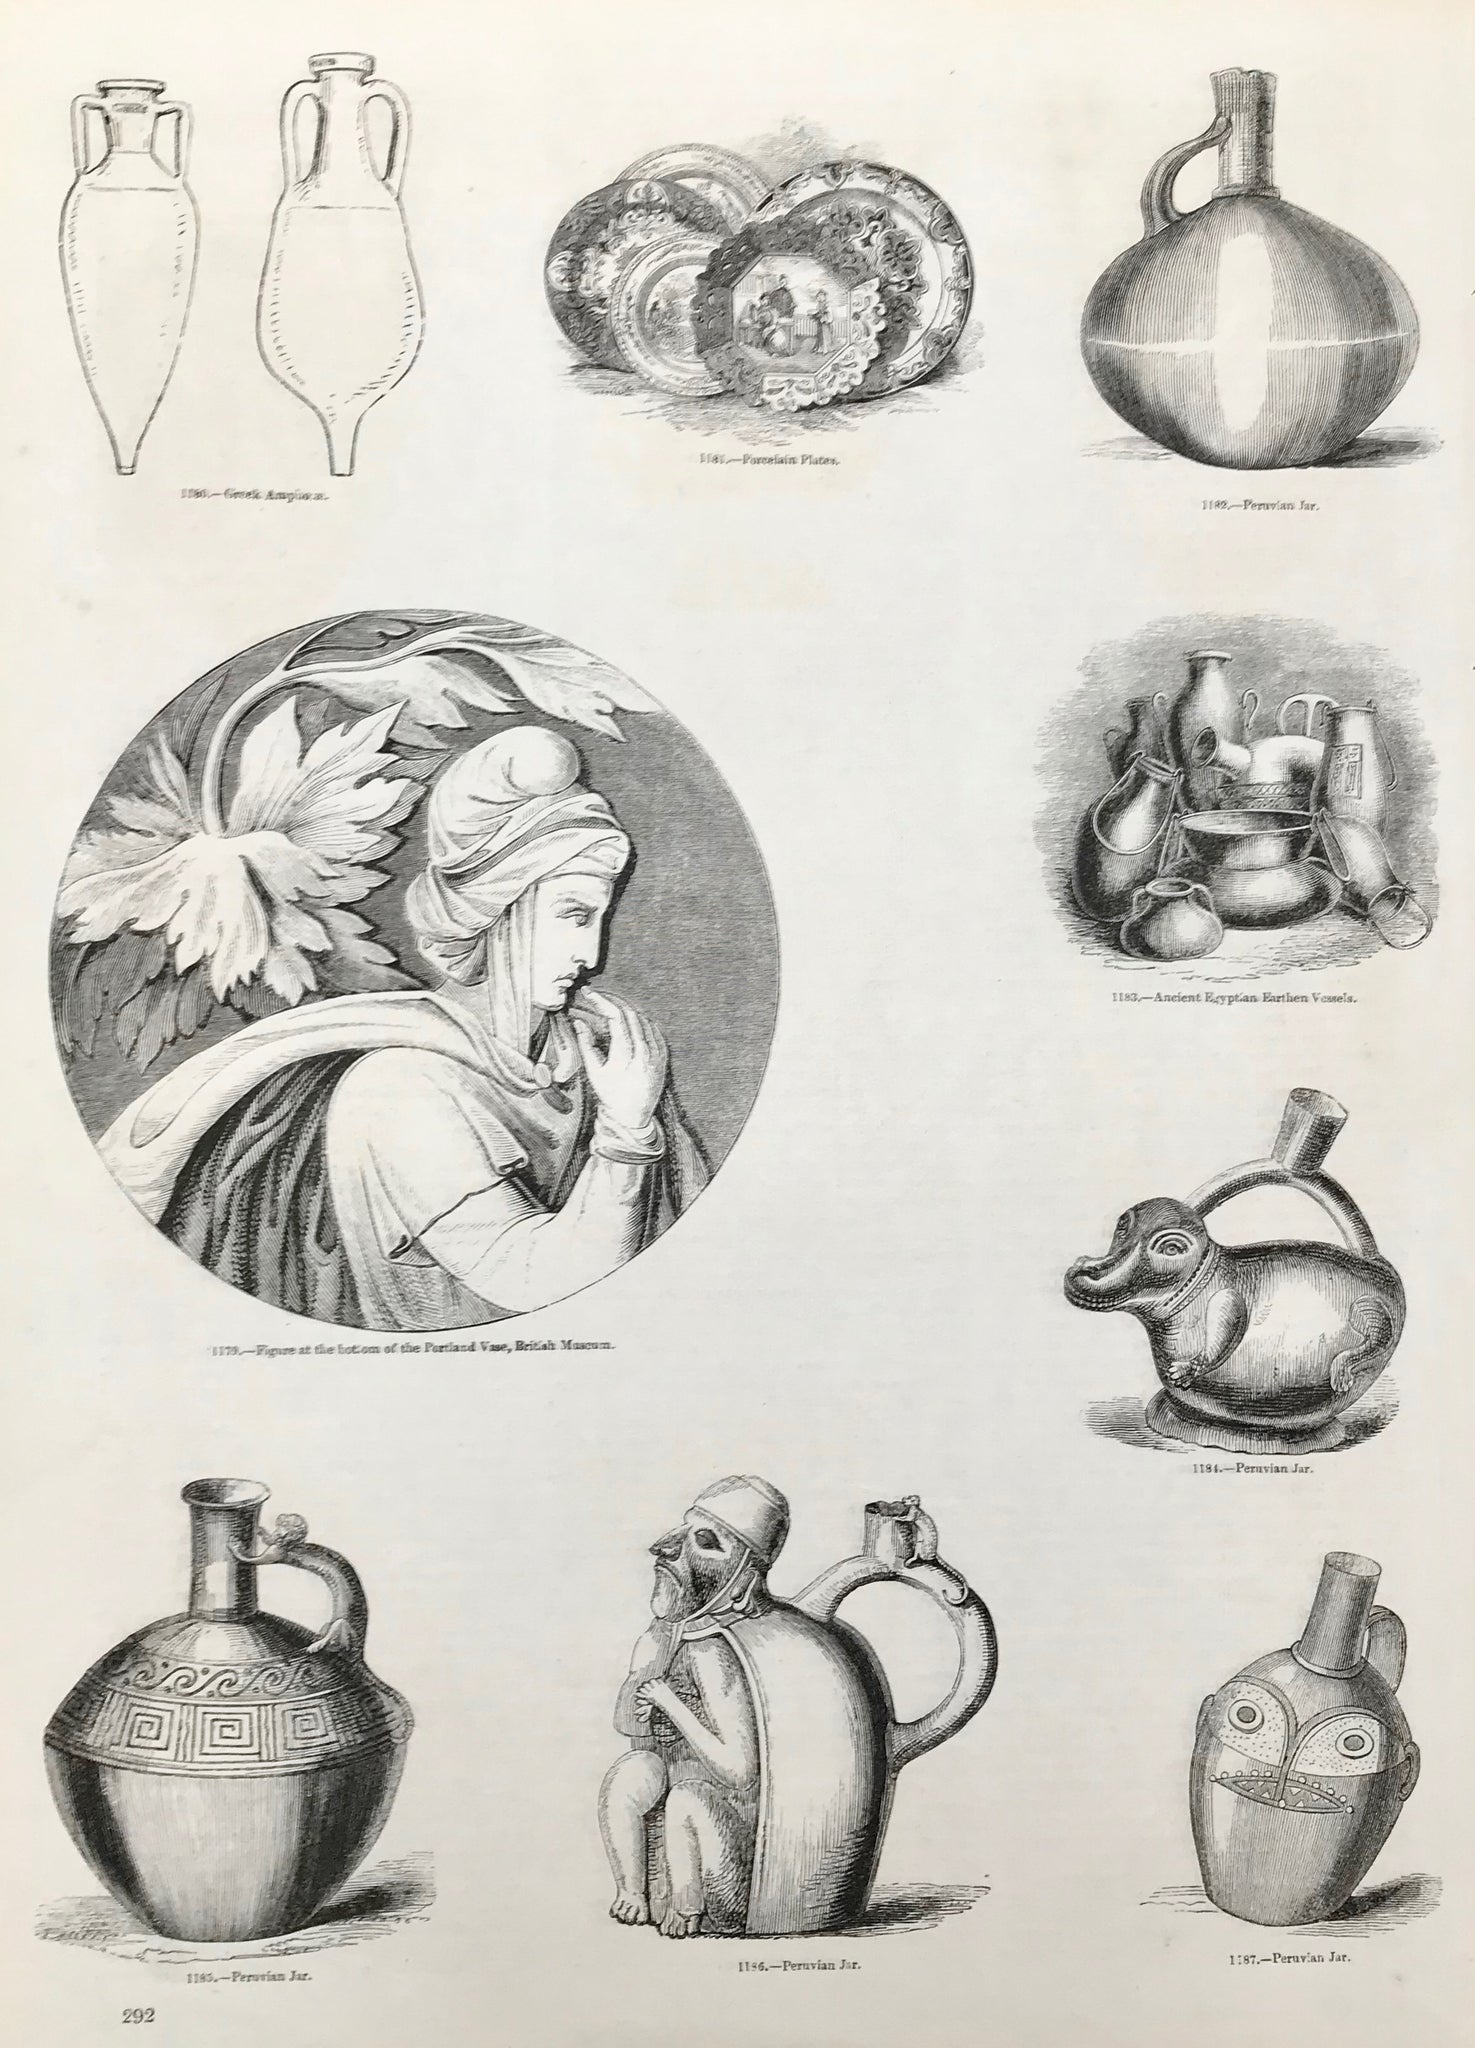 Center: Figure at the bottom of the Portland Vase, British Museum. Peruvian and Eygptian vessels.  Wood engravings ca 1875. Backside is printed. Minor spots in margins.